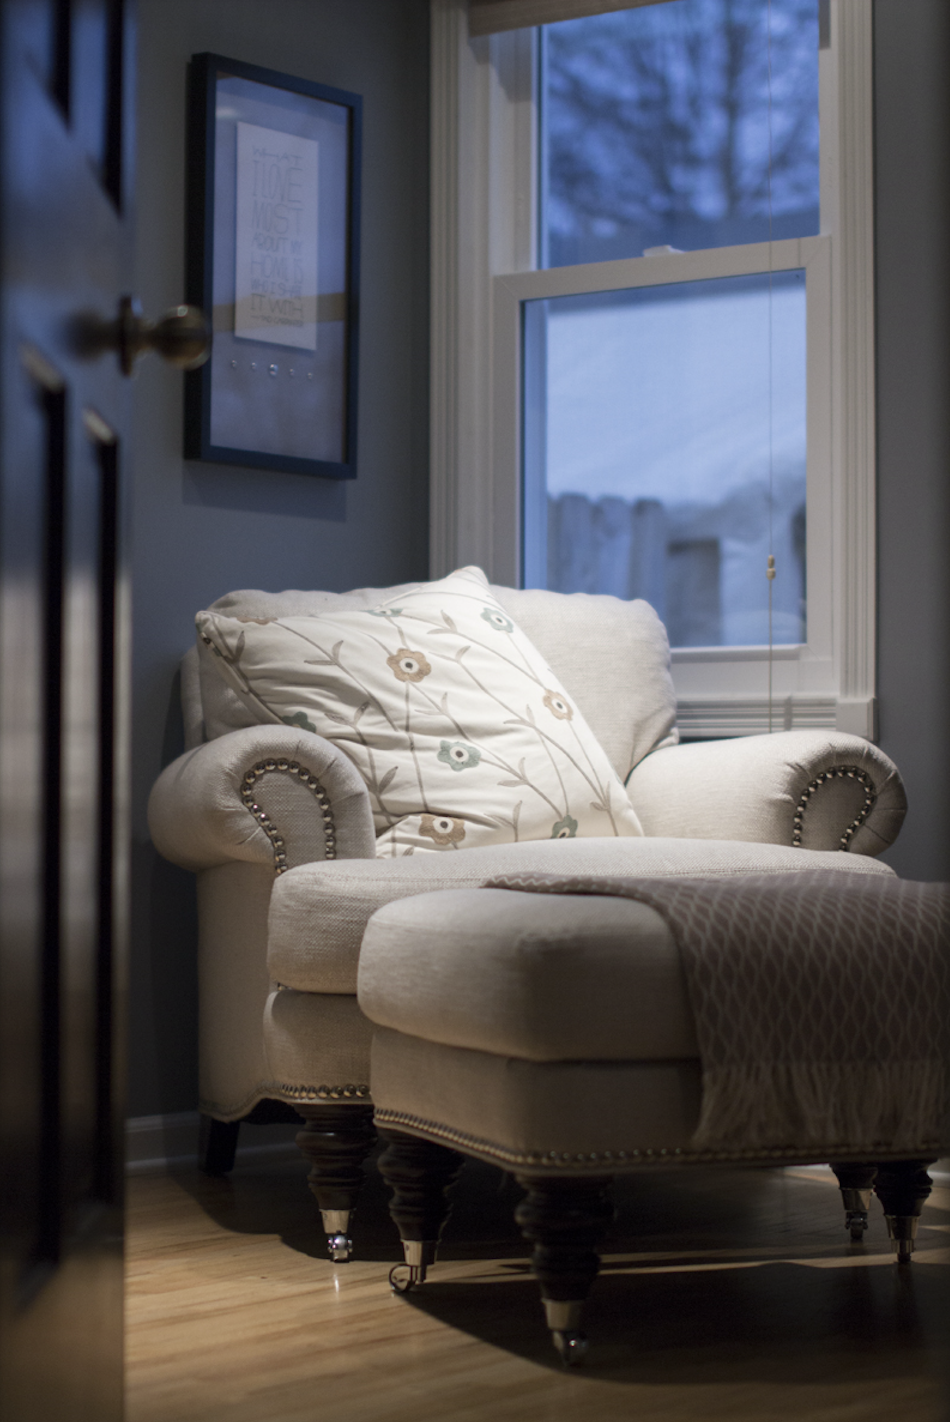 Cream colored Chair with a Floral pillow and throw create a cozy vibe.